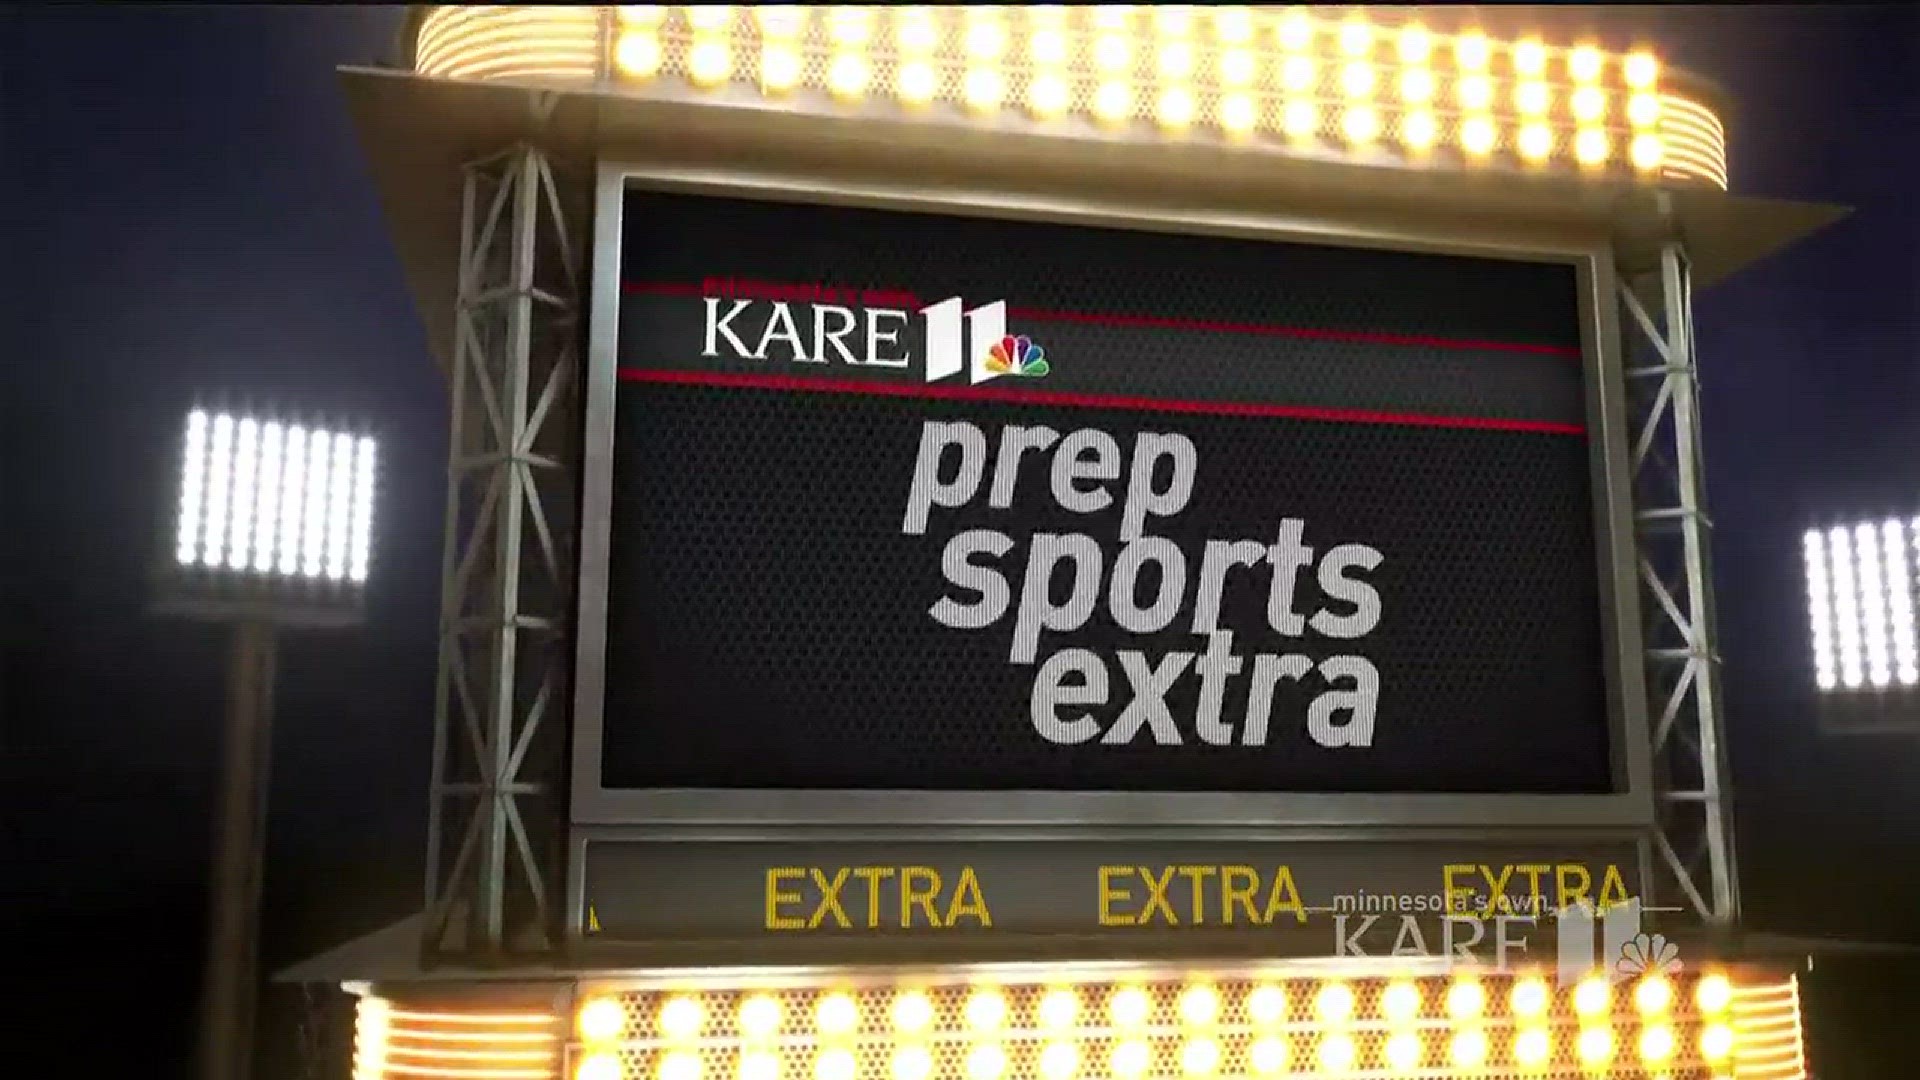 Randy Shaver hosts the 34th year of KARE 11's Prep Sports Extra. Watch the highlights from Friday, Sept. 1, 2017.